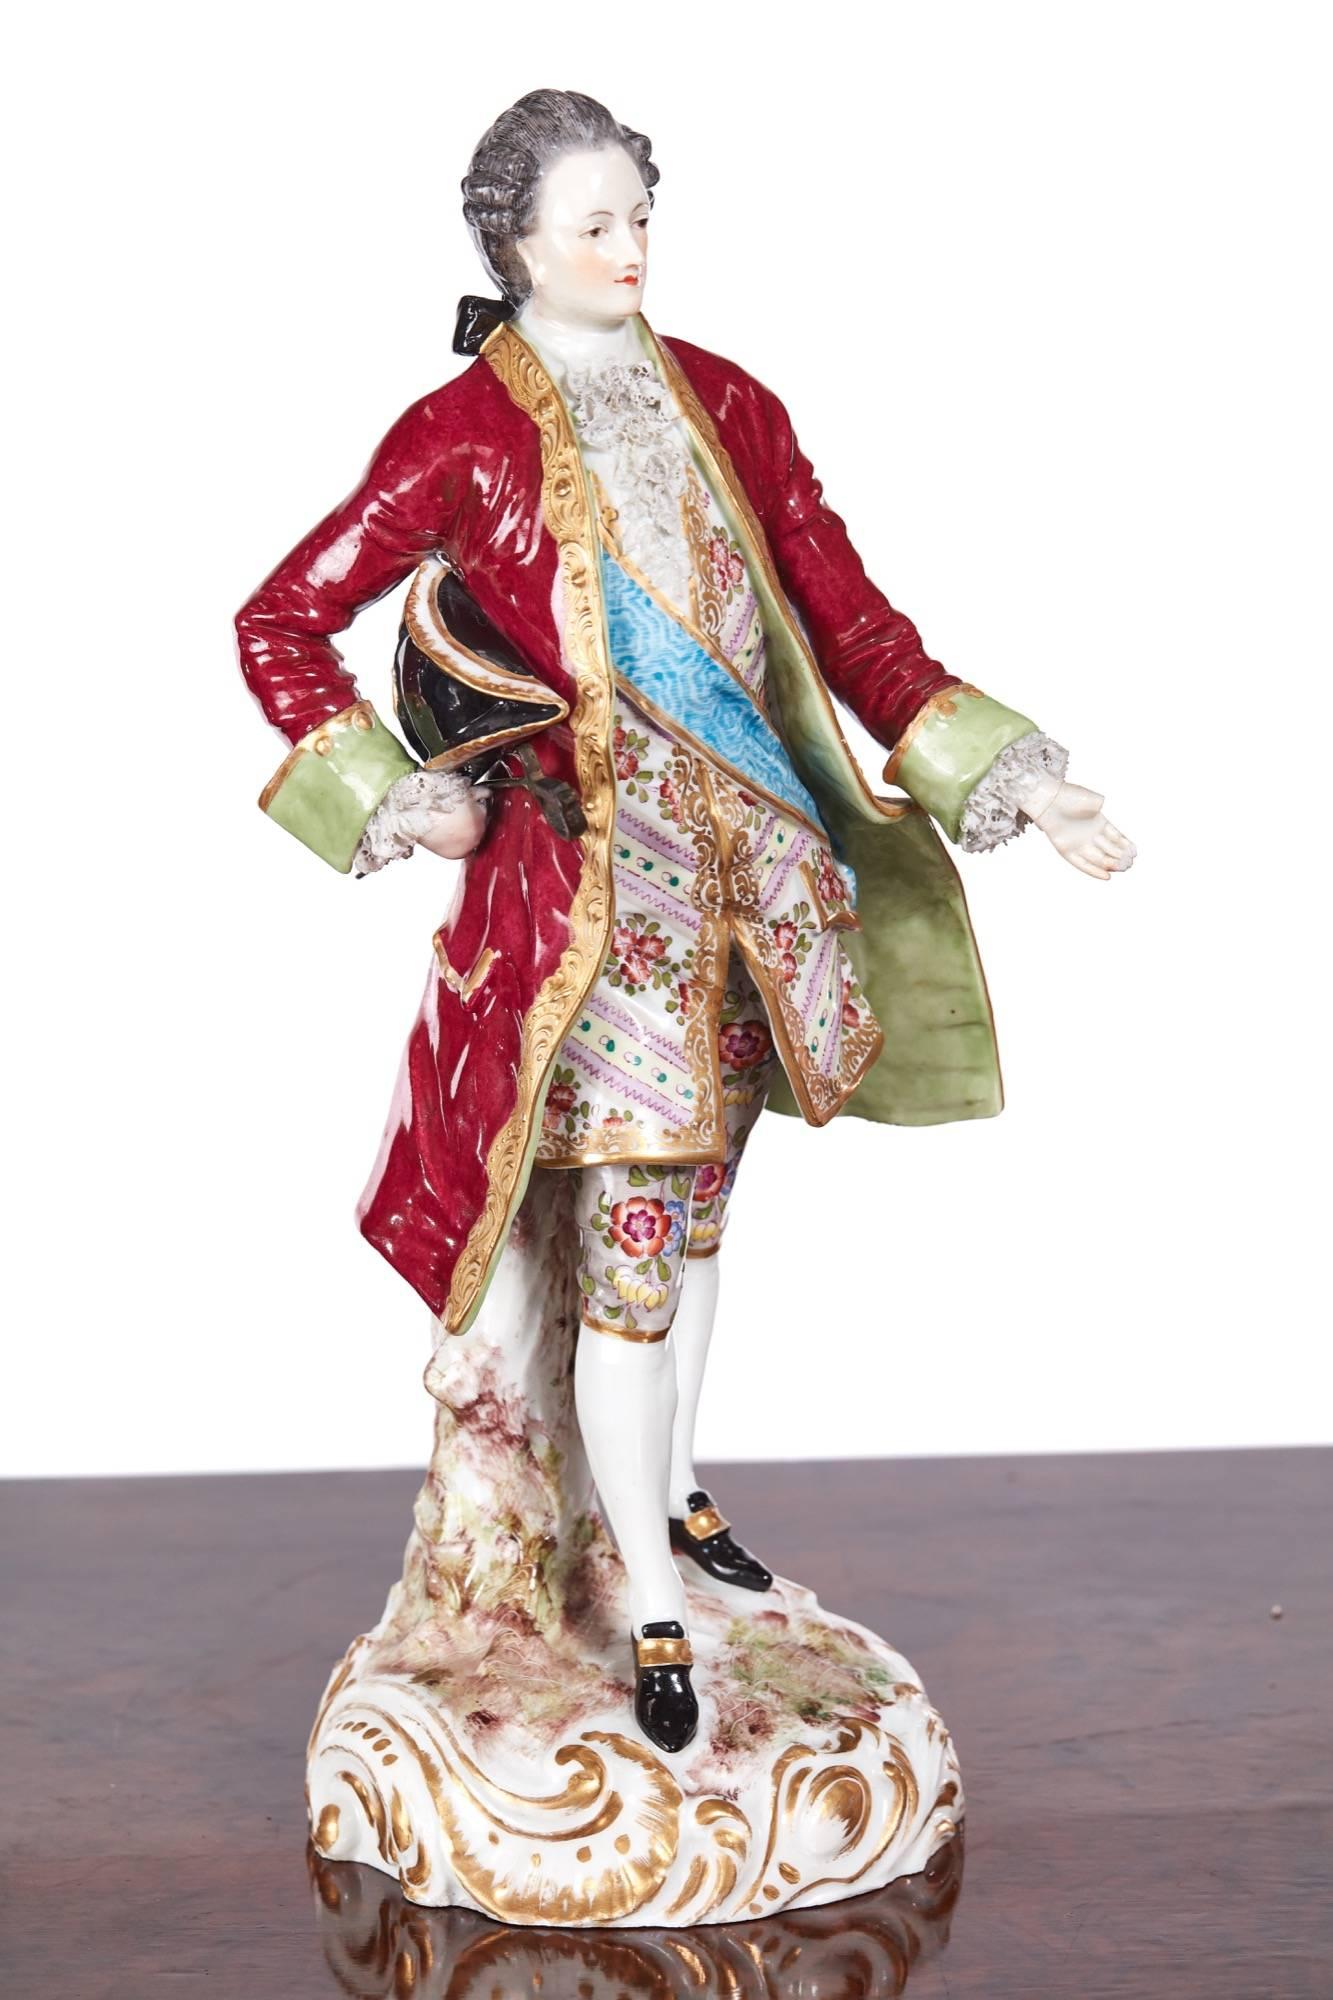 Pair of antique Dresden figures, of a lady and a gentleman in lovely colorful 18th century dress slight damage to figures.